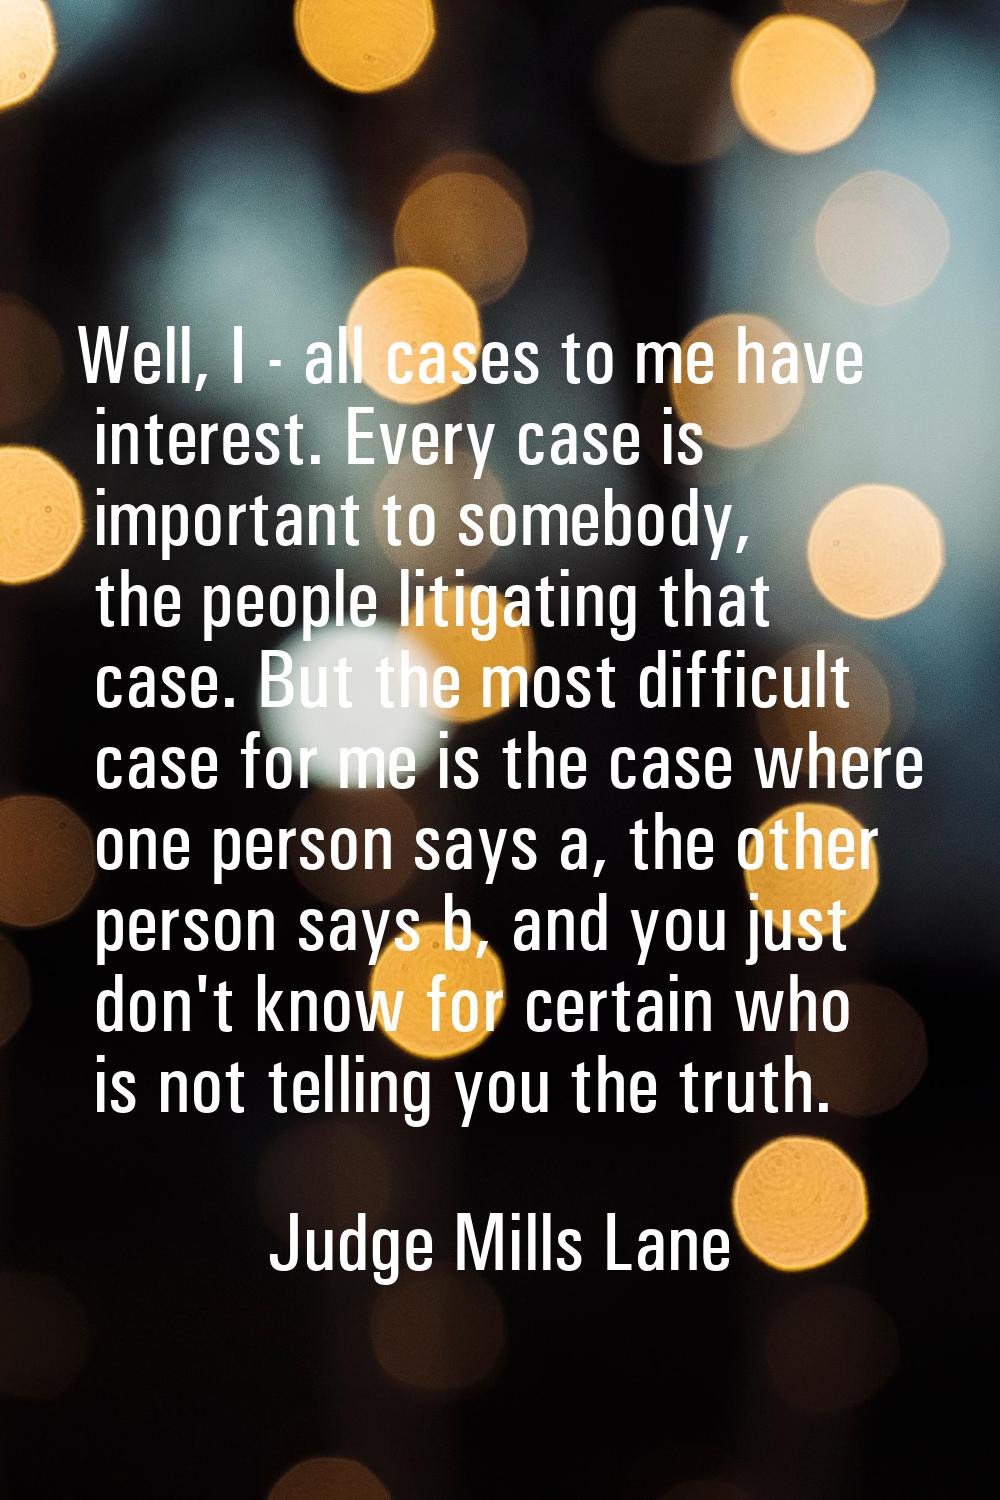 Well, I - all cases to me have interest. Every case is important to somebody, the people litigating